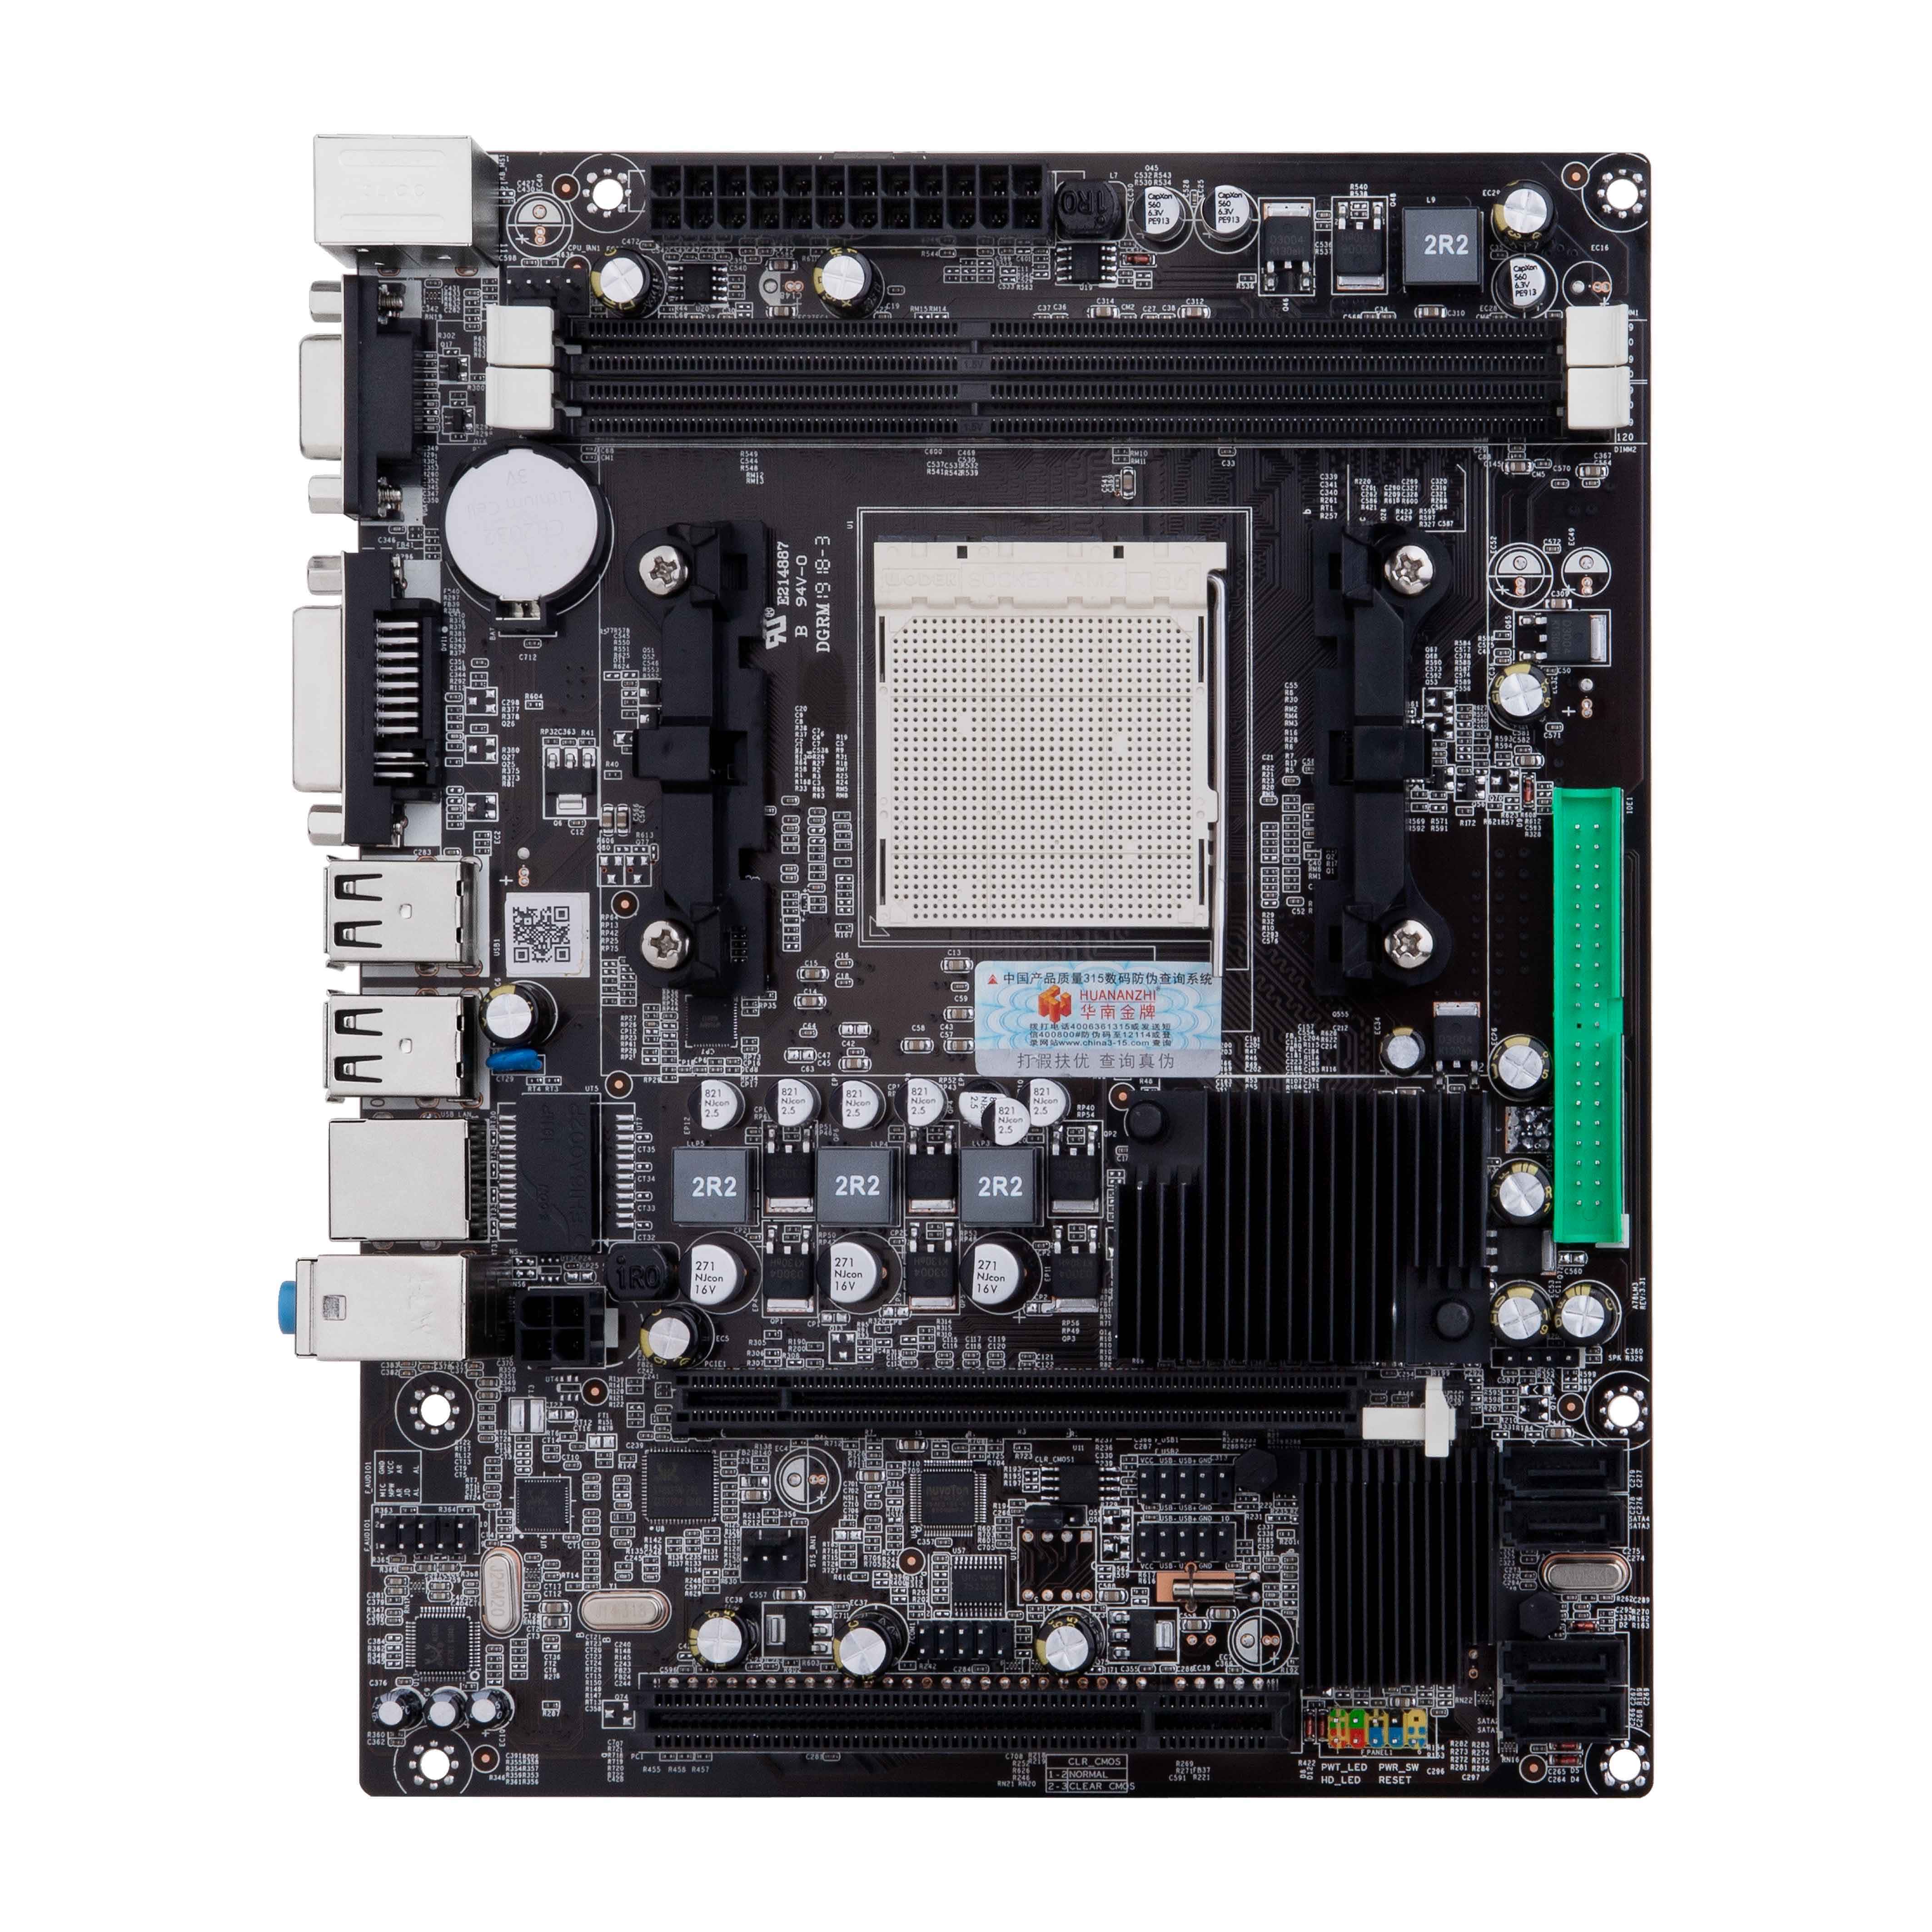 Download Huananzhi A78 Motherboard Free